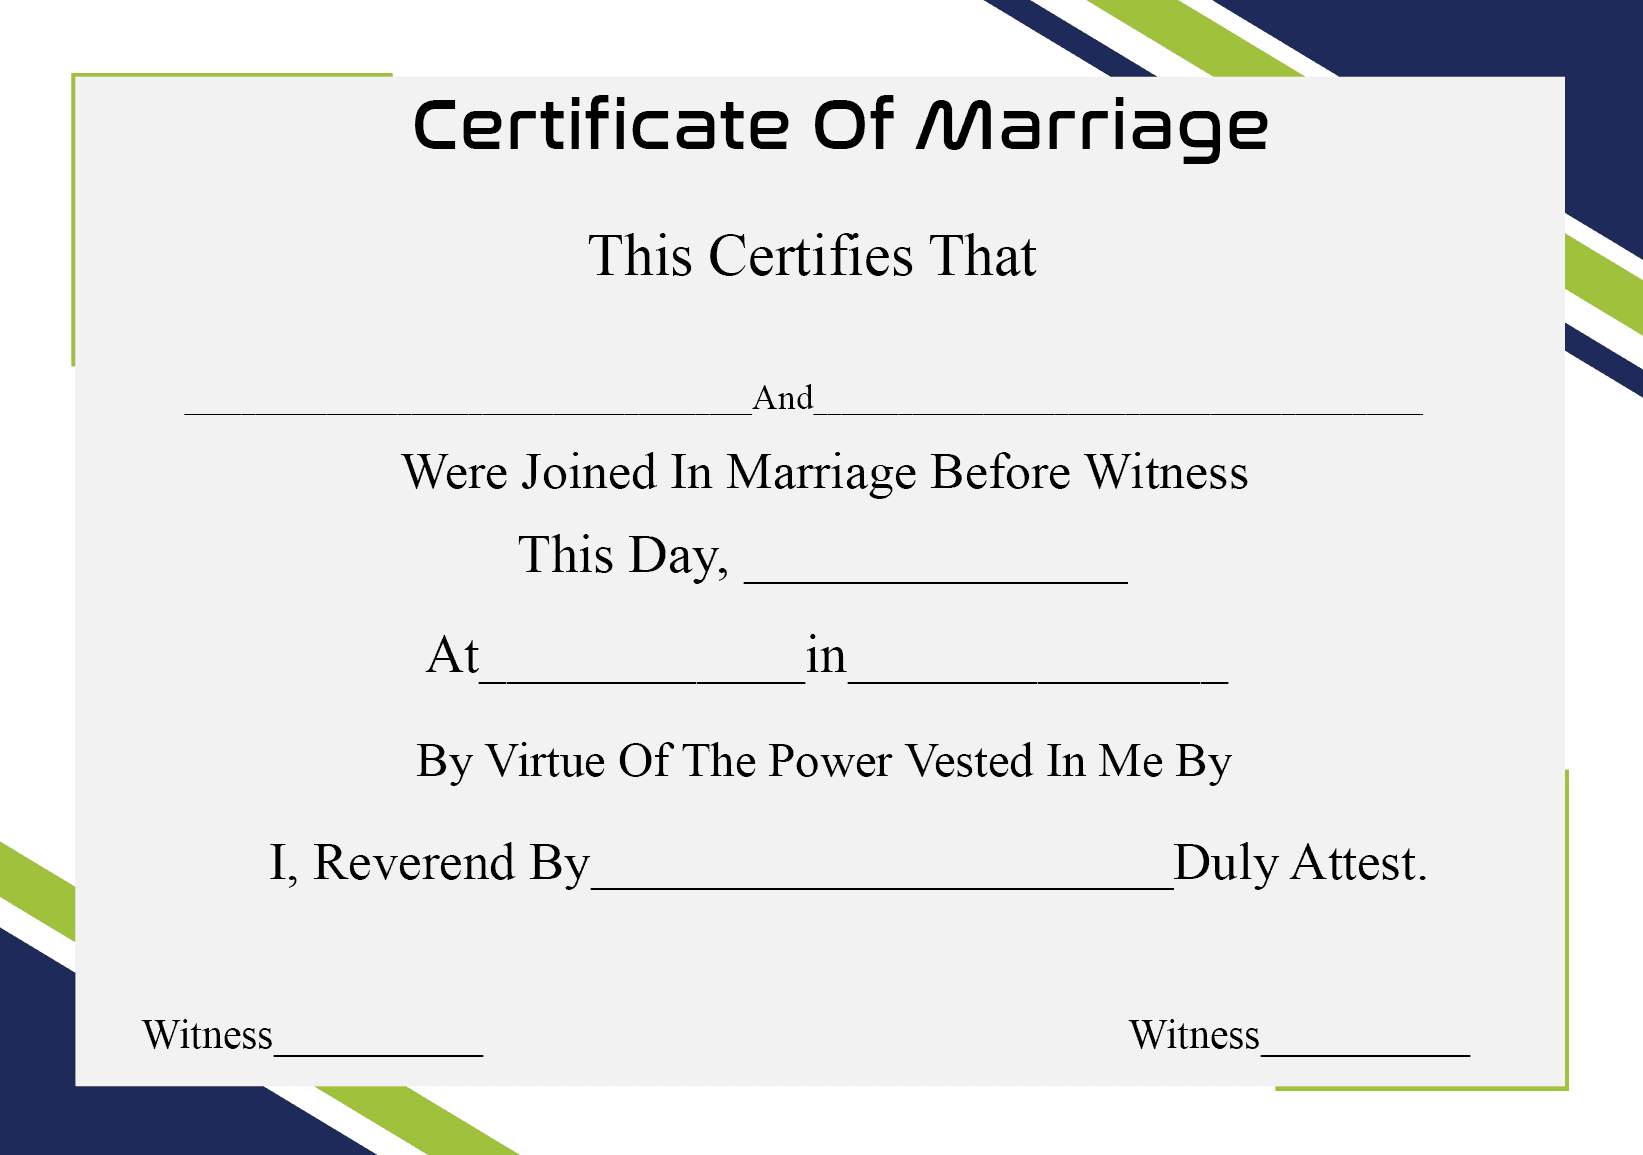 Certificate Of Marriage Sample